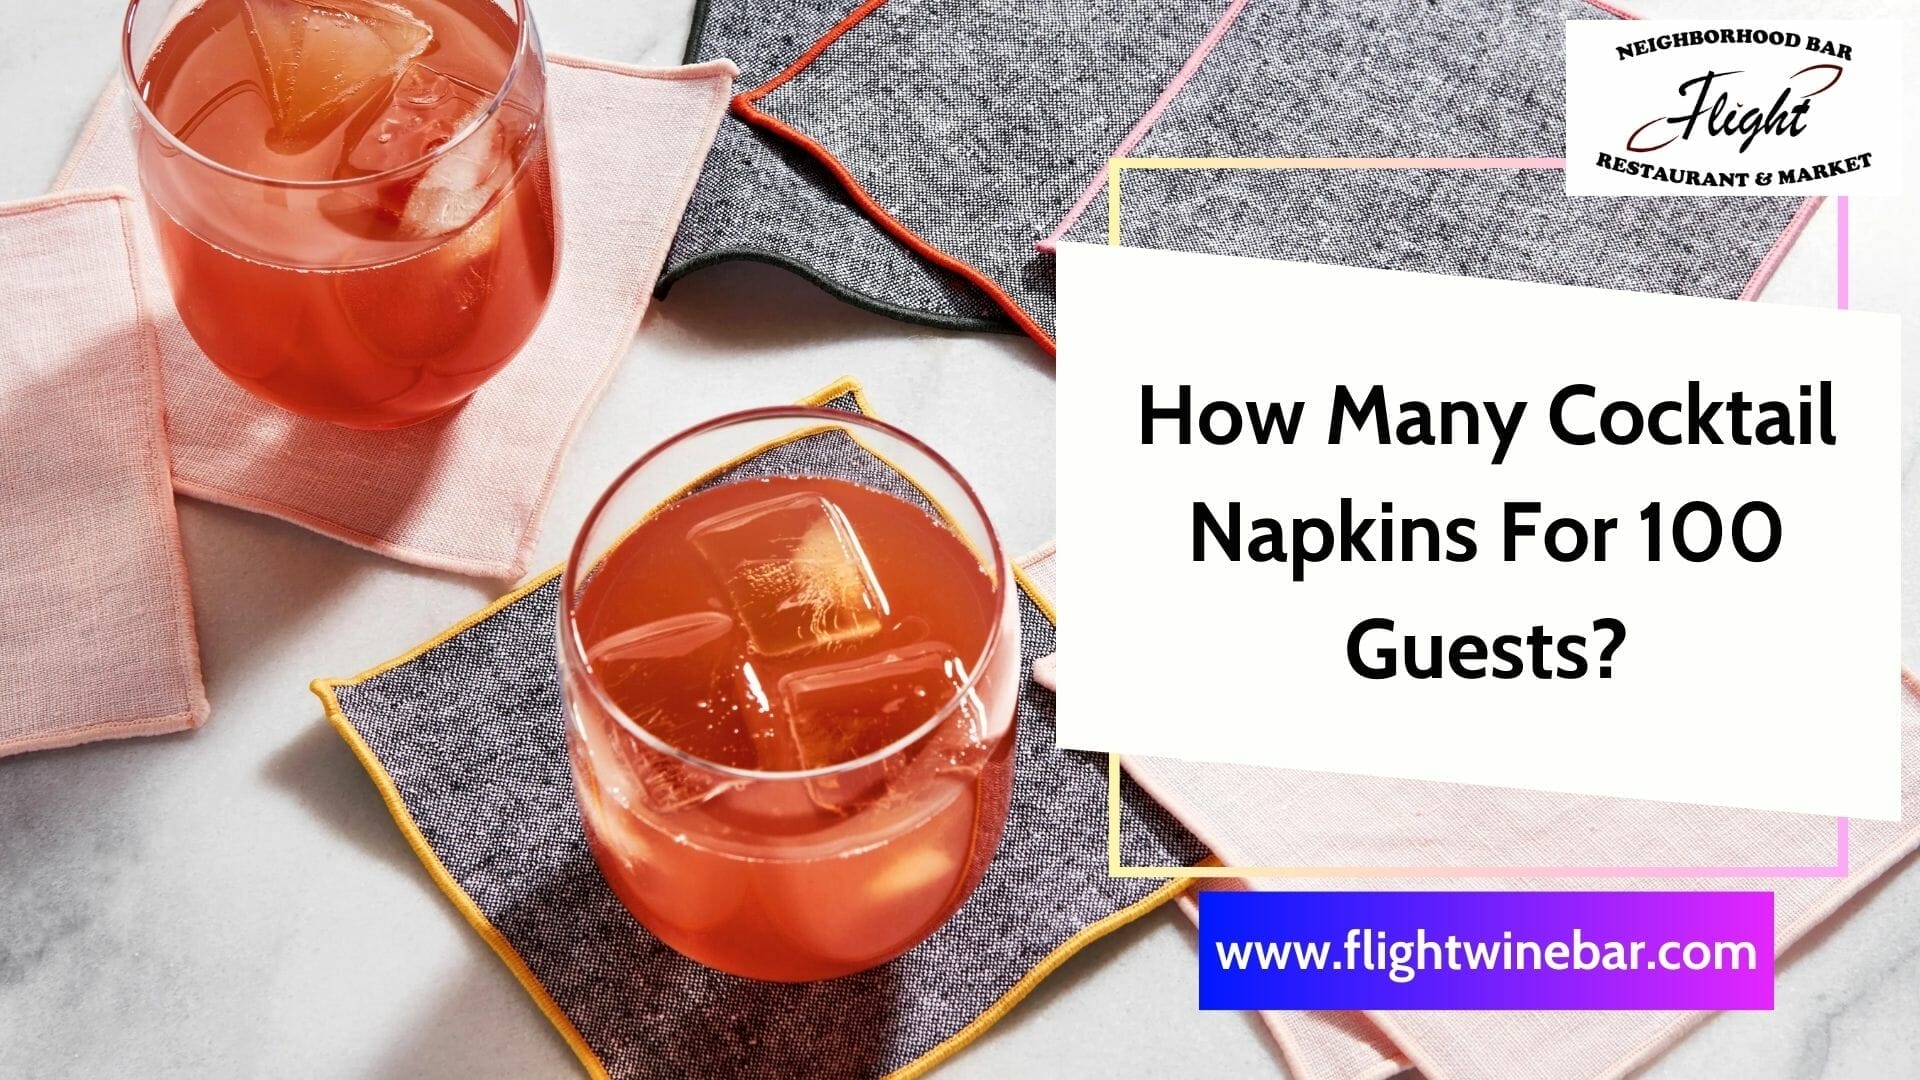 How Many Cocktail Napkins For 100 Guests